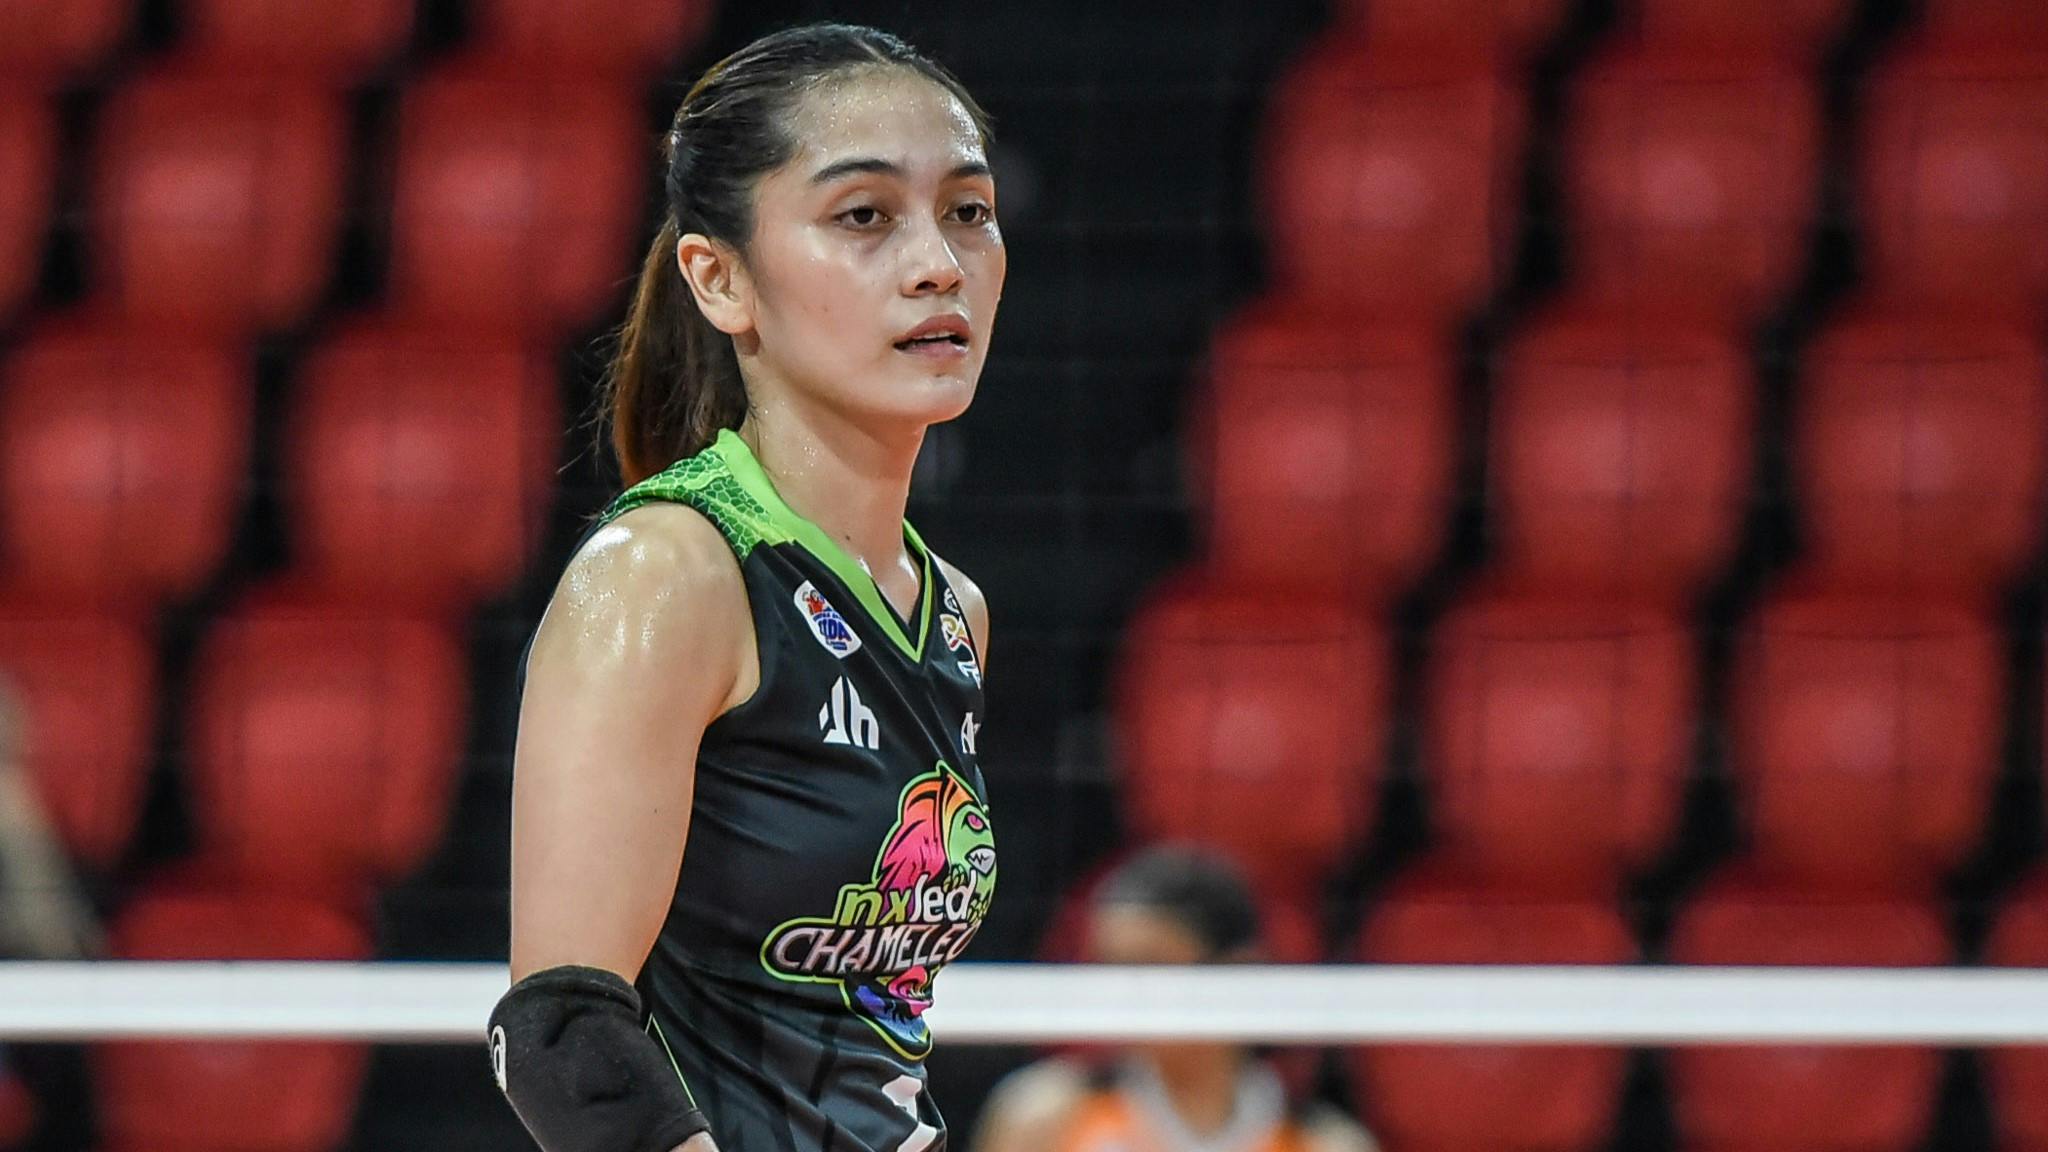 PVL: Lycha Ebon, Nxled gear up for strong finish after morale-boosting win over Farm Fresh